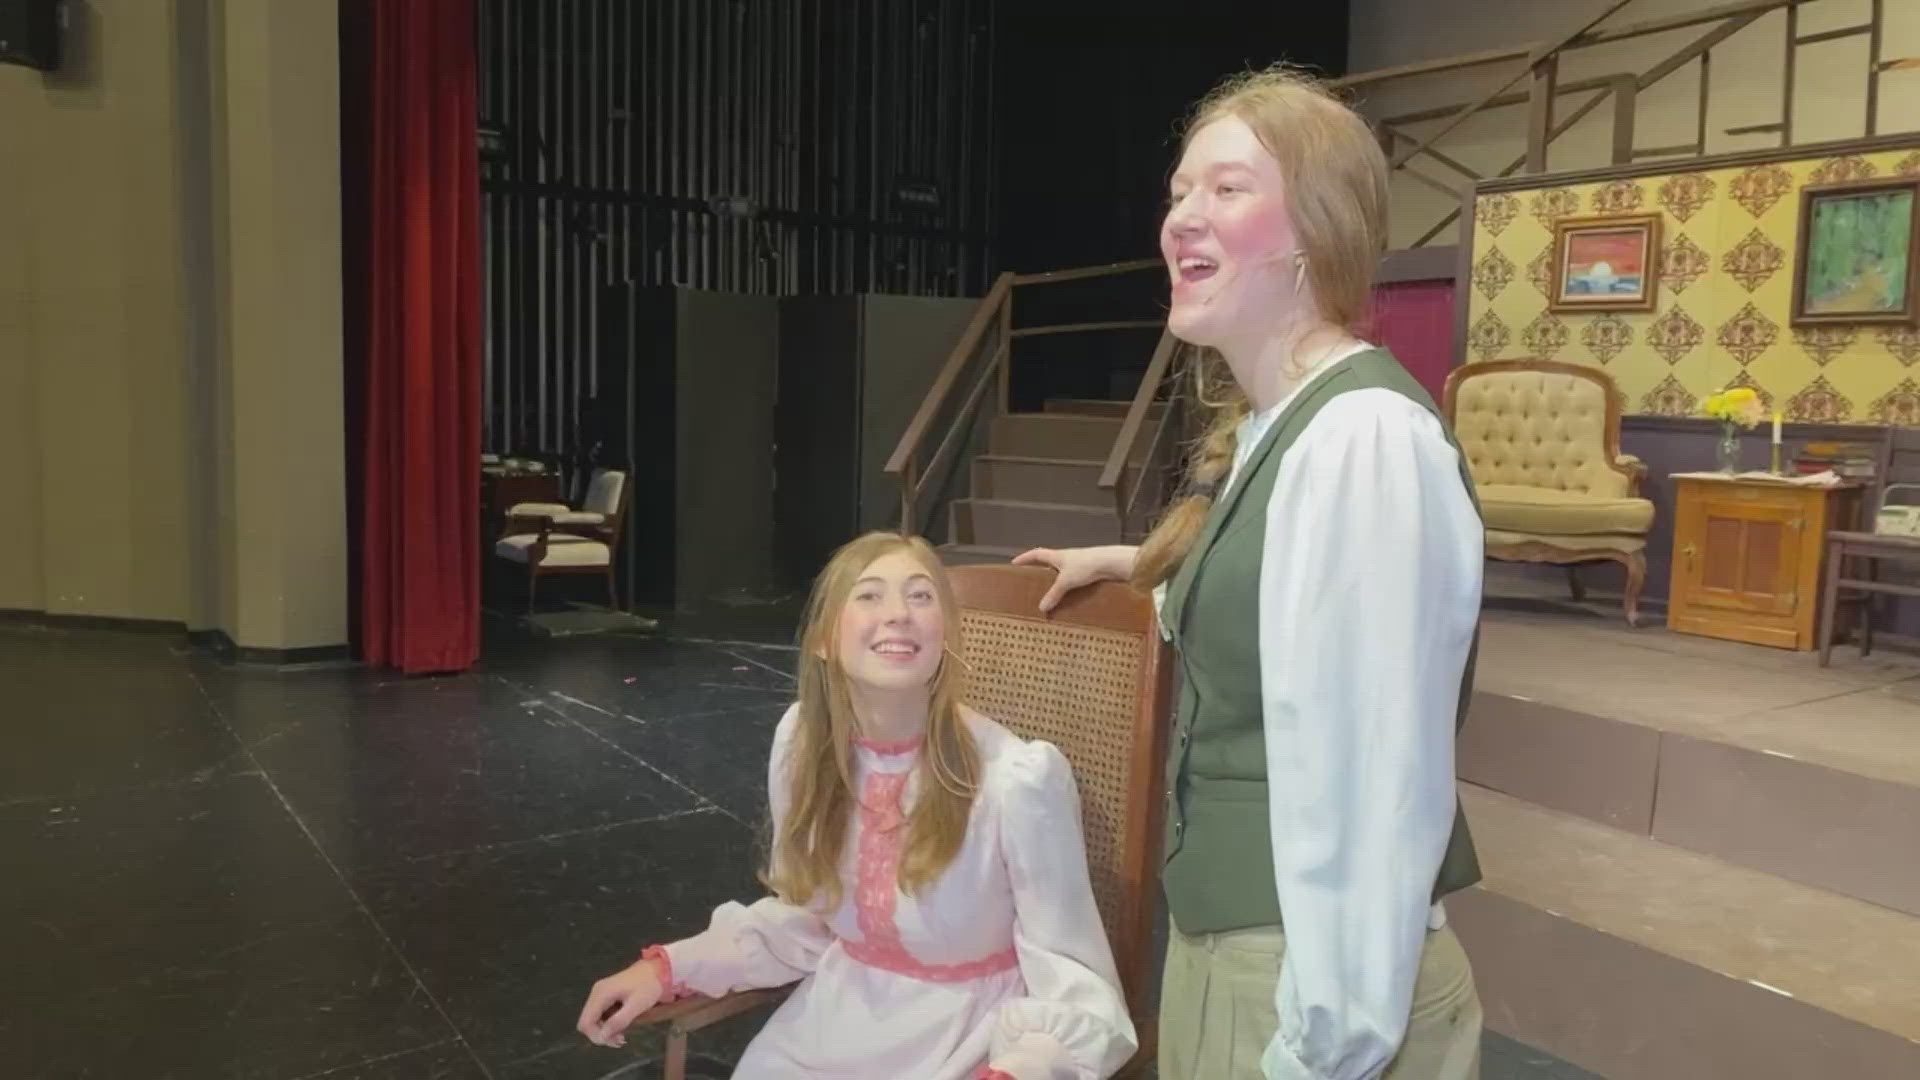 Meet the people behind "Little Women" the musical at C. K. McClatchy.